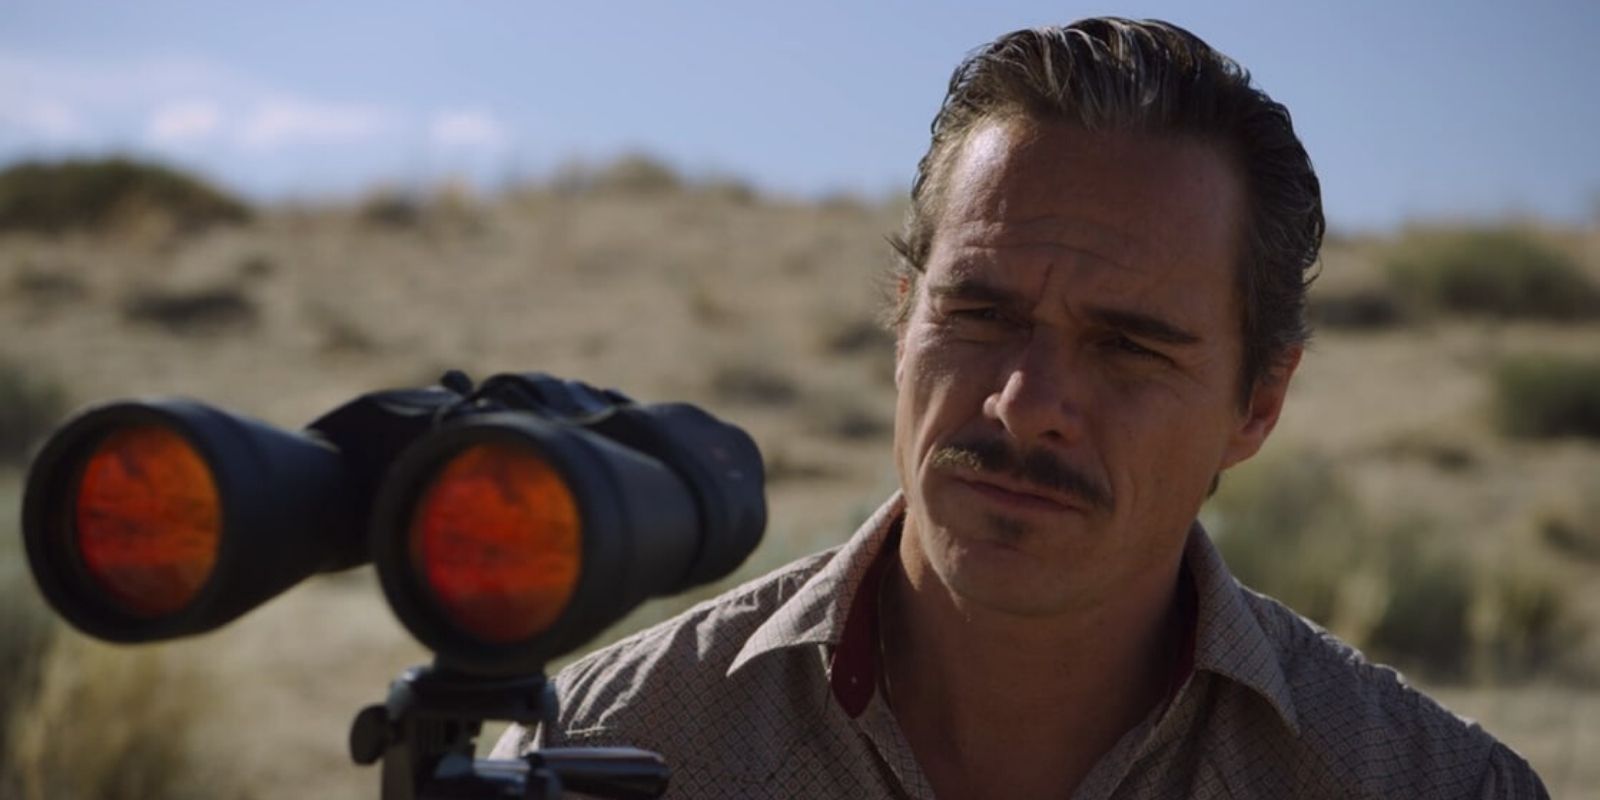 Lalo Salamanca has a pair of binoculars out in the desert in Better Call Saul